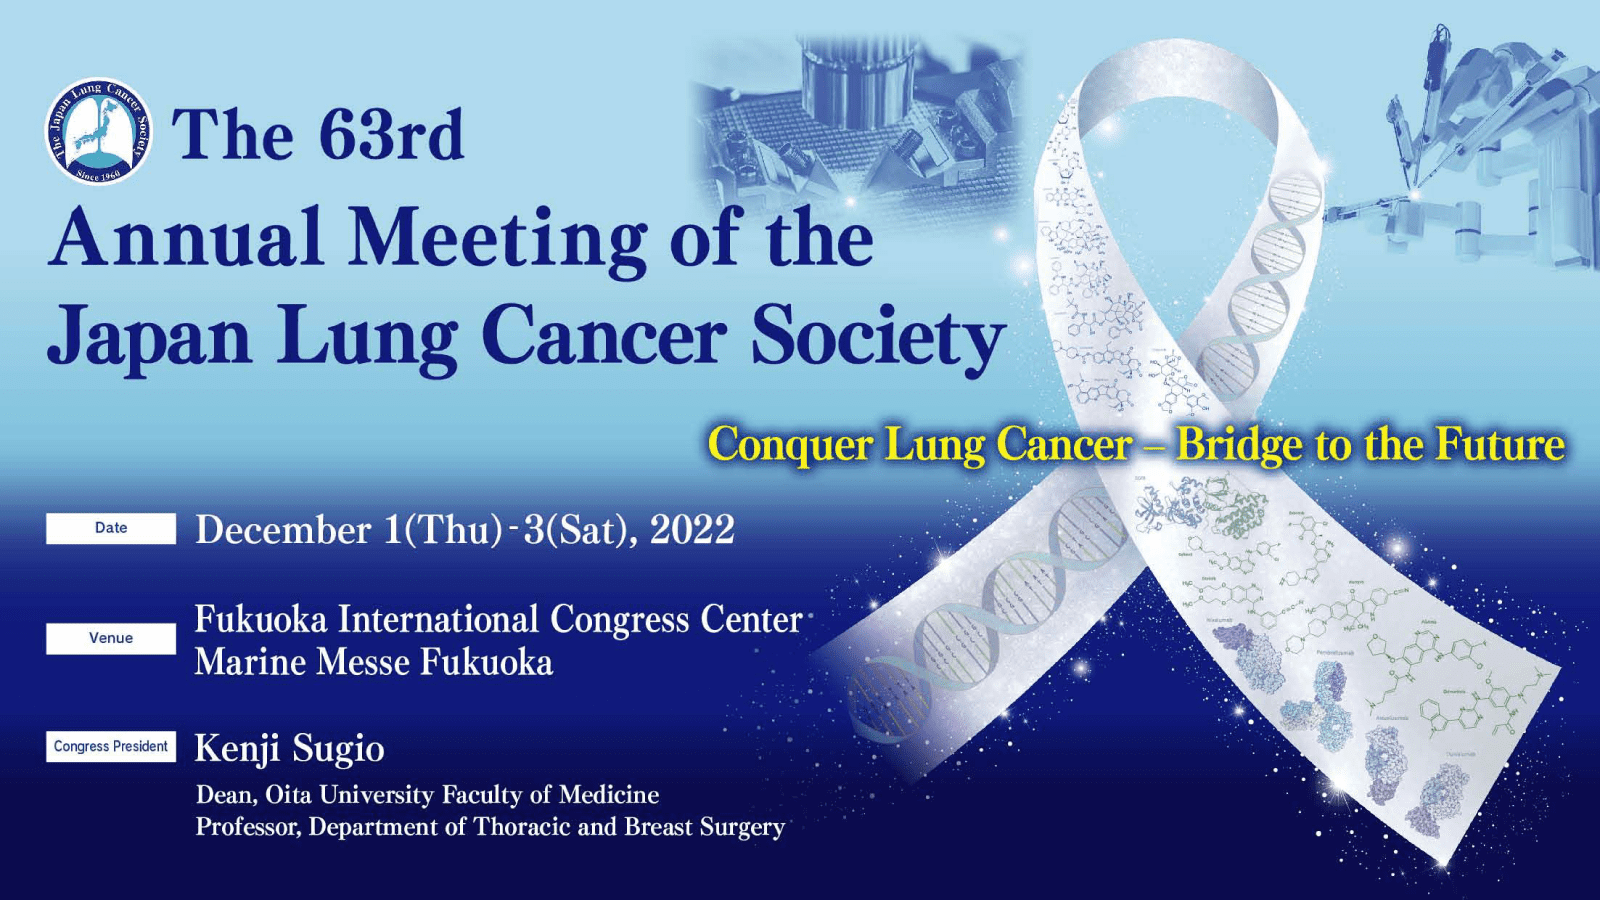 The 63rd Annual Meeting of the Japan Lung Cancer Society